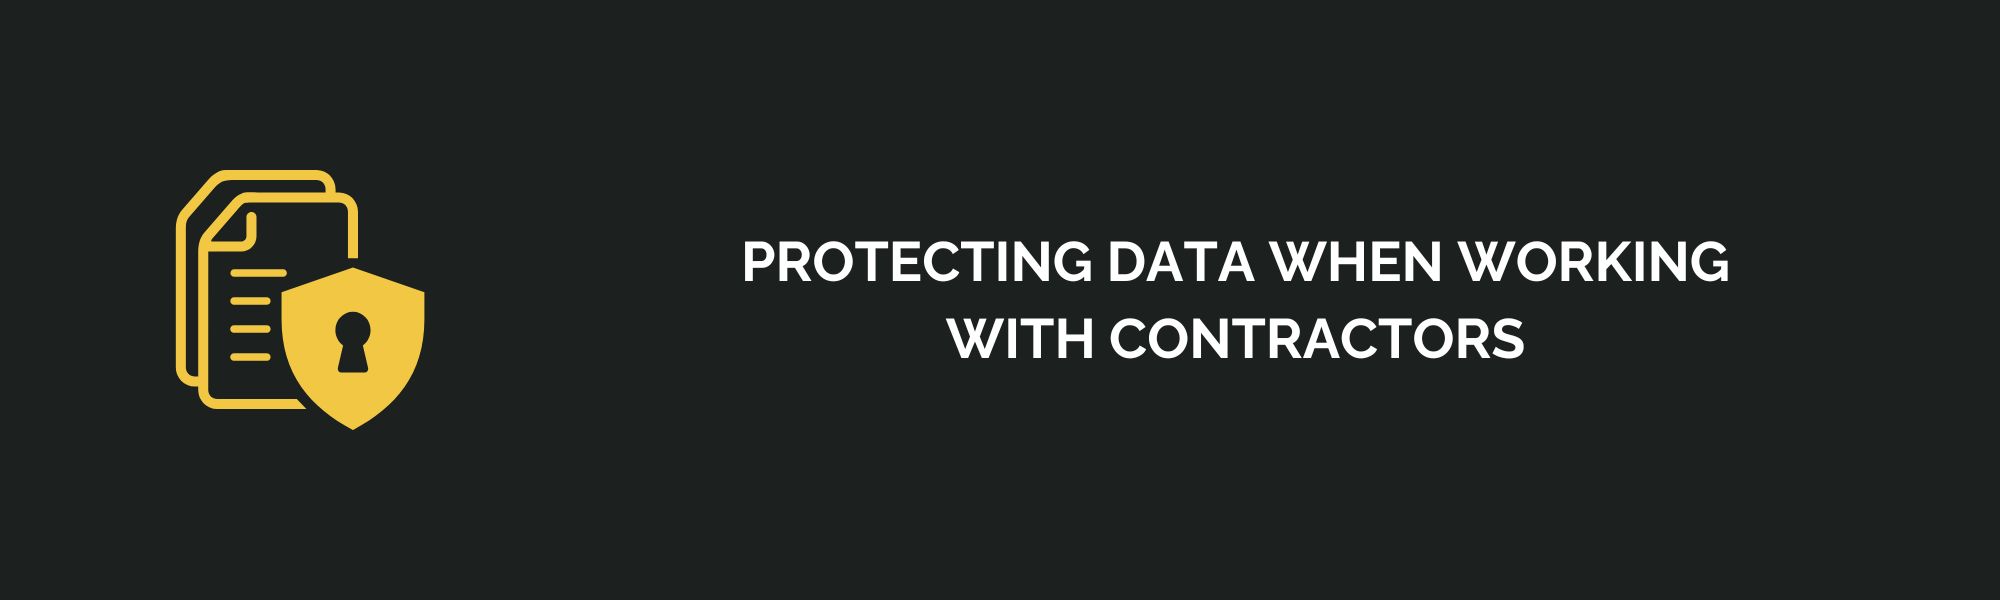 Protecting Data When Working With Contractors